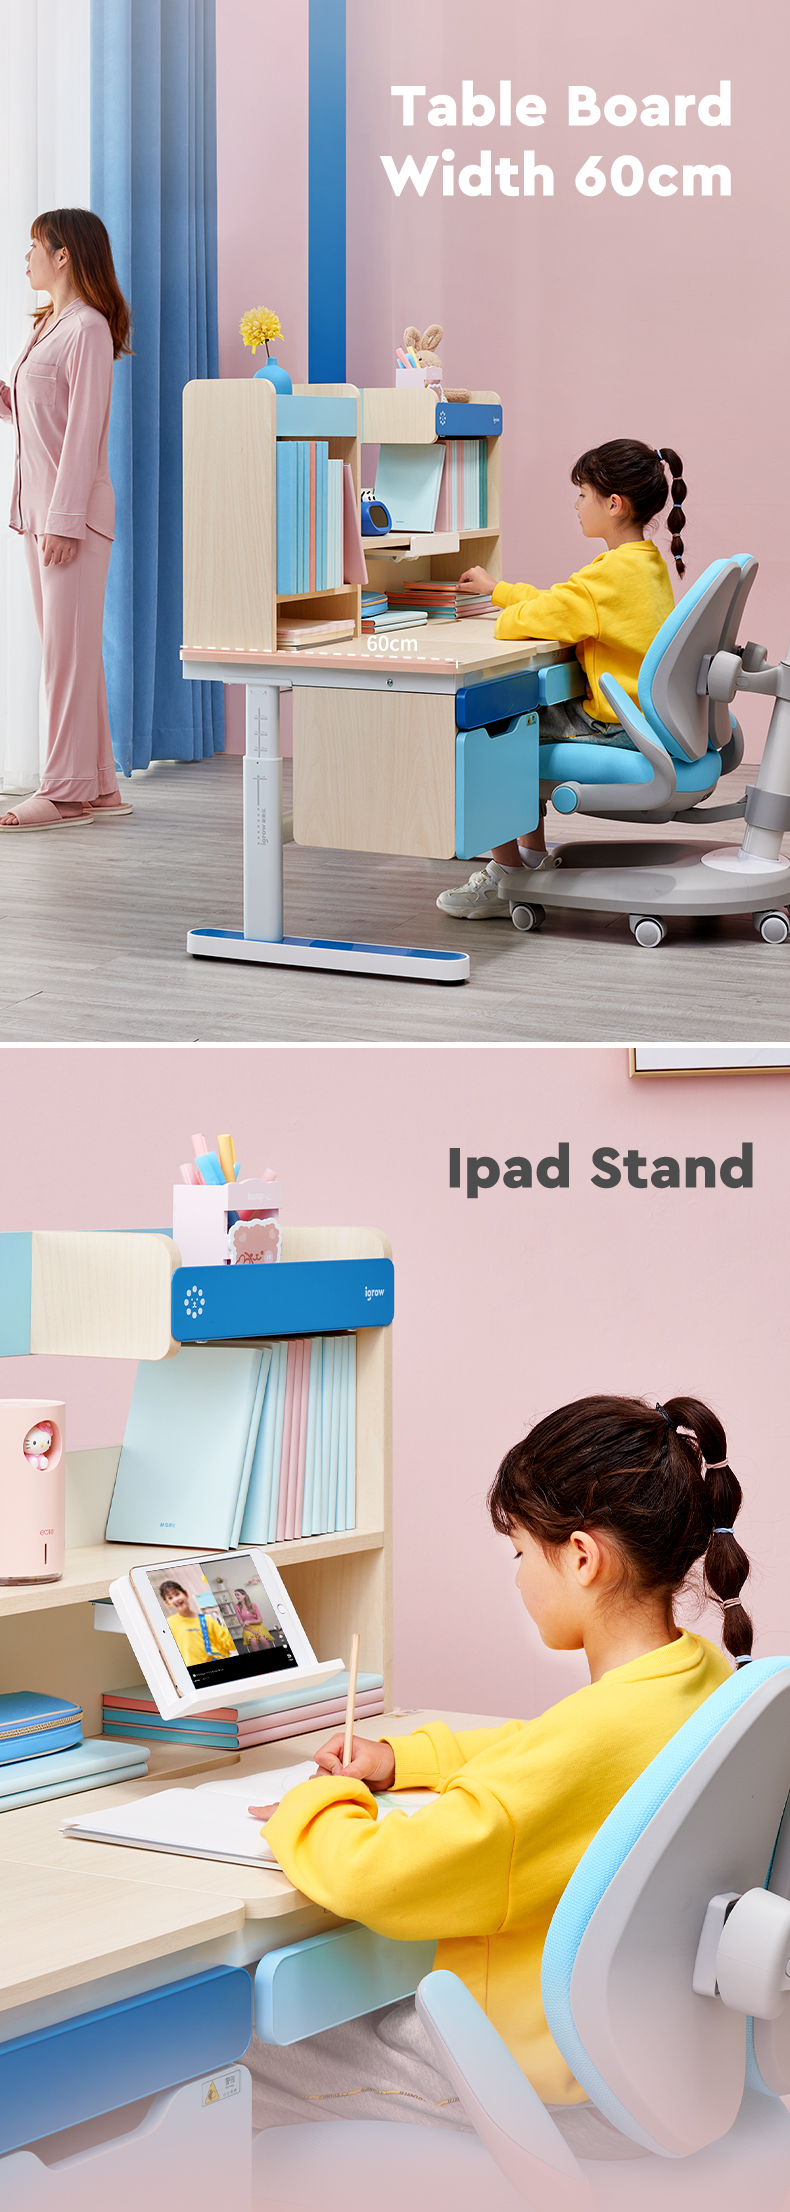 study table &chair for children